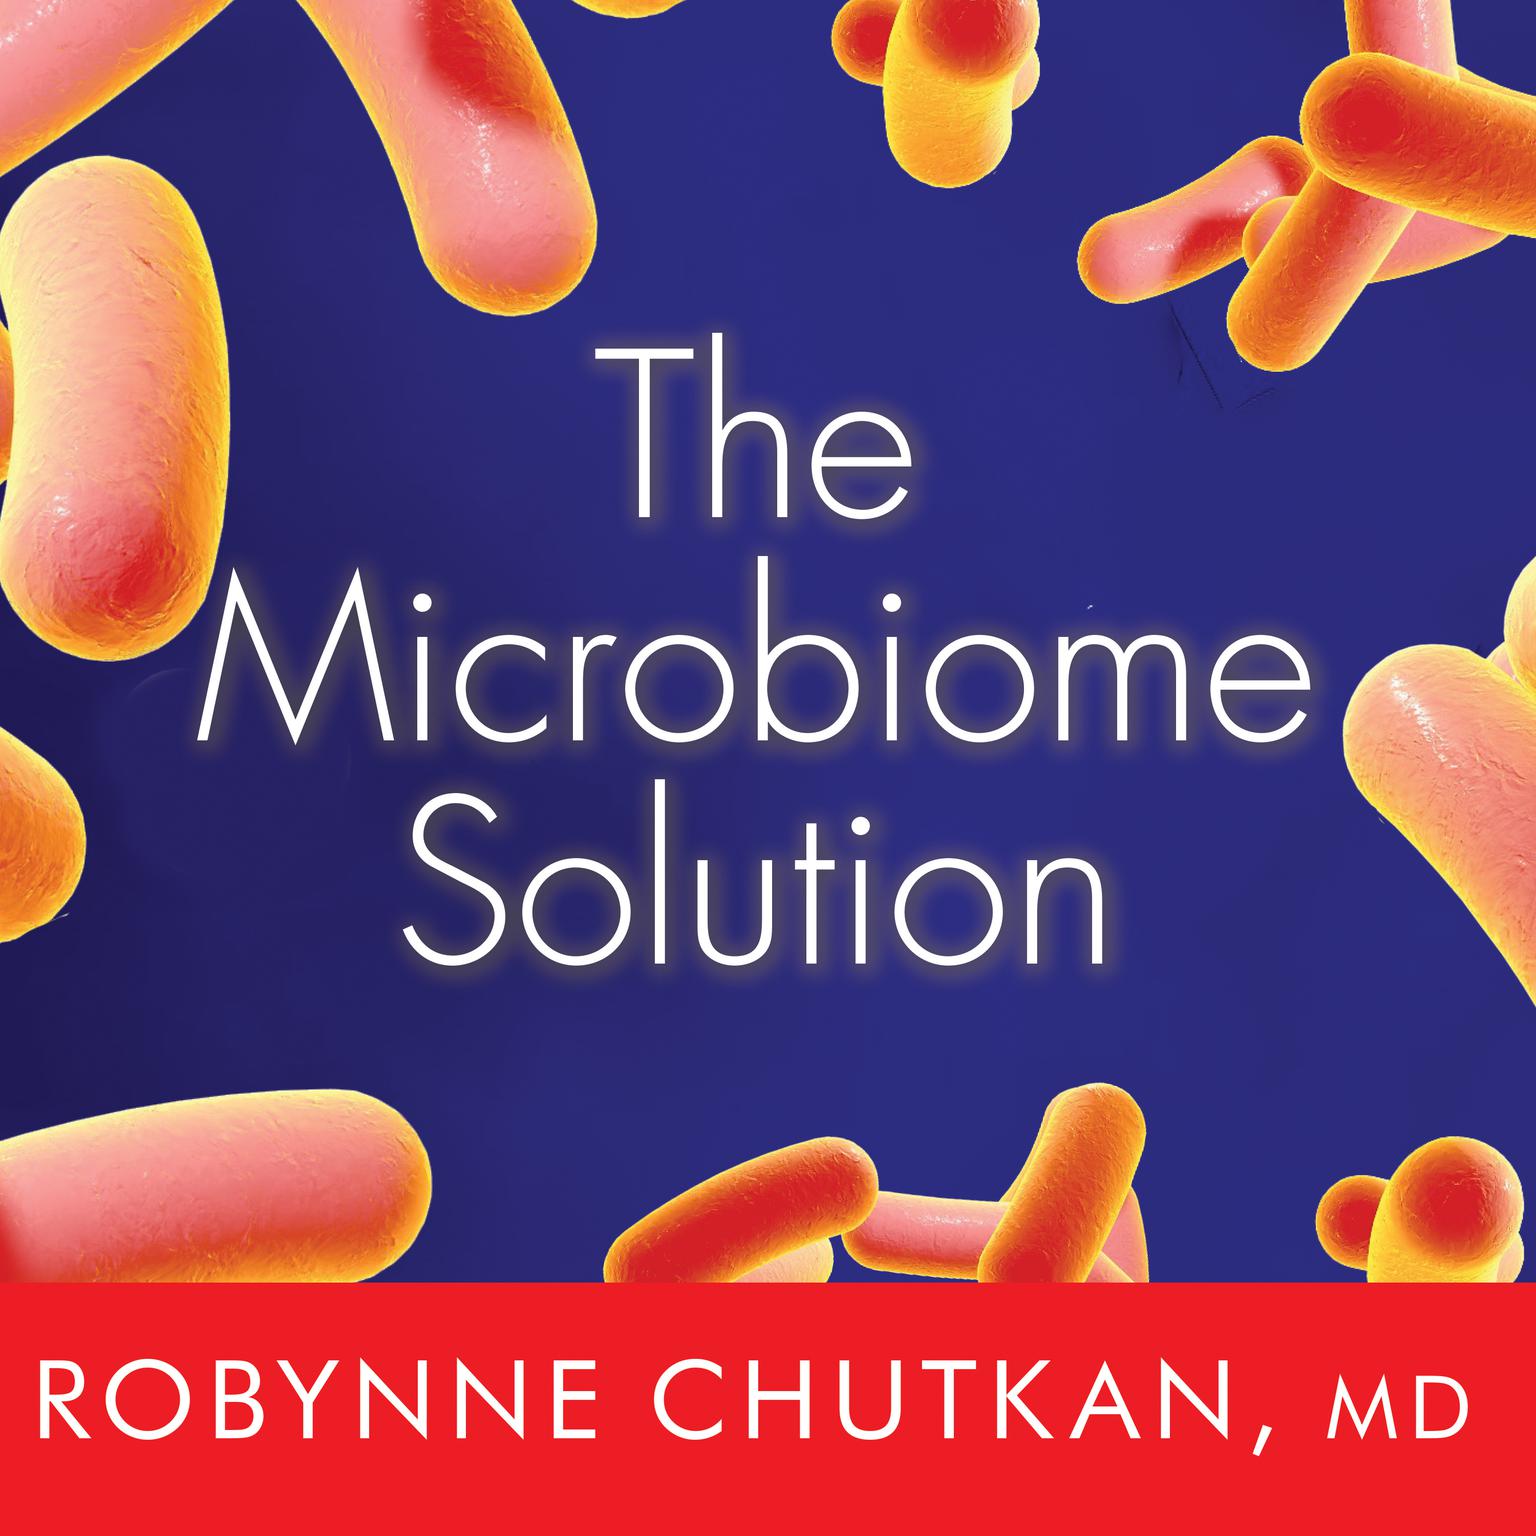 The Microbiome Solution Audiobook by Robynne Chutkan — Download Now